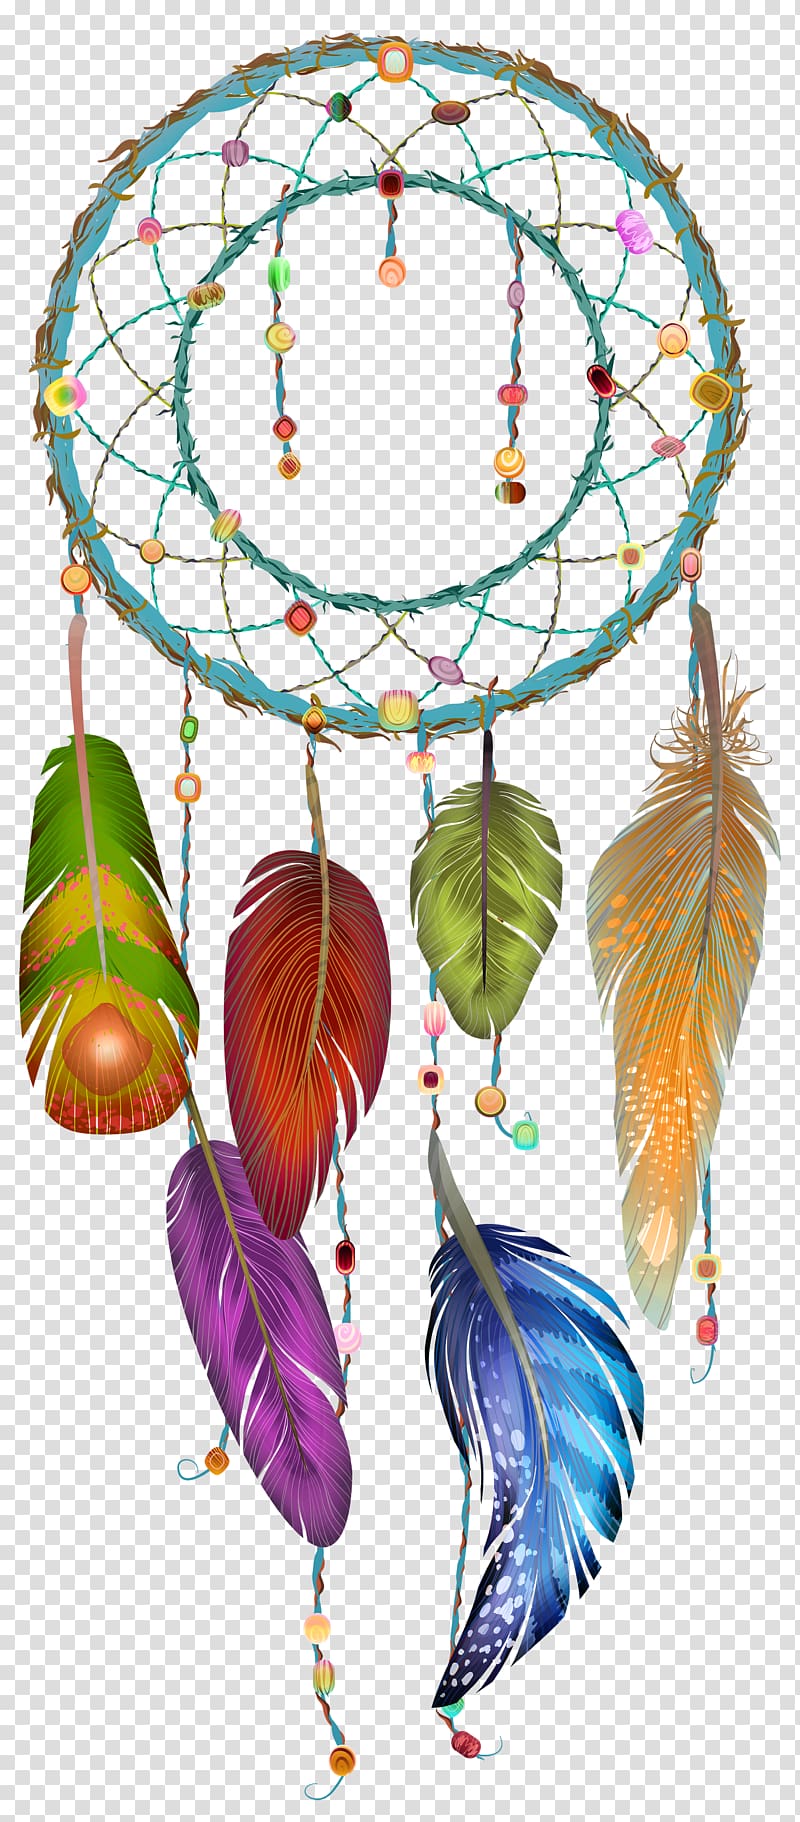 Dream Catcher Drawings Stock Illustrations – 54 Dream Catcher Drawings  Stock Illustrations, Vectors & Clipart - Dreamstime